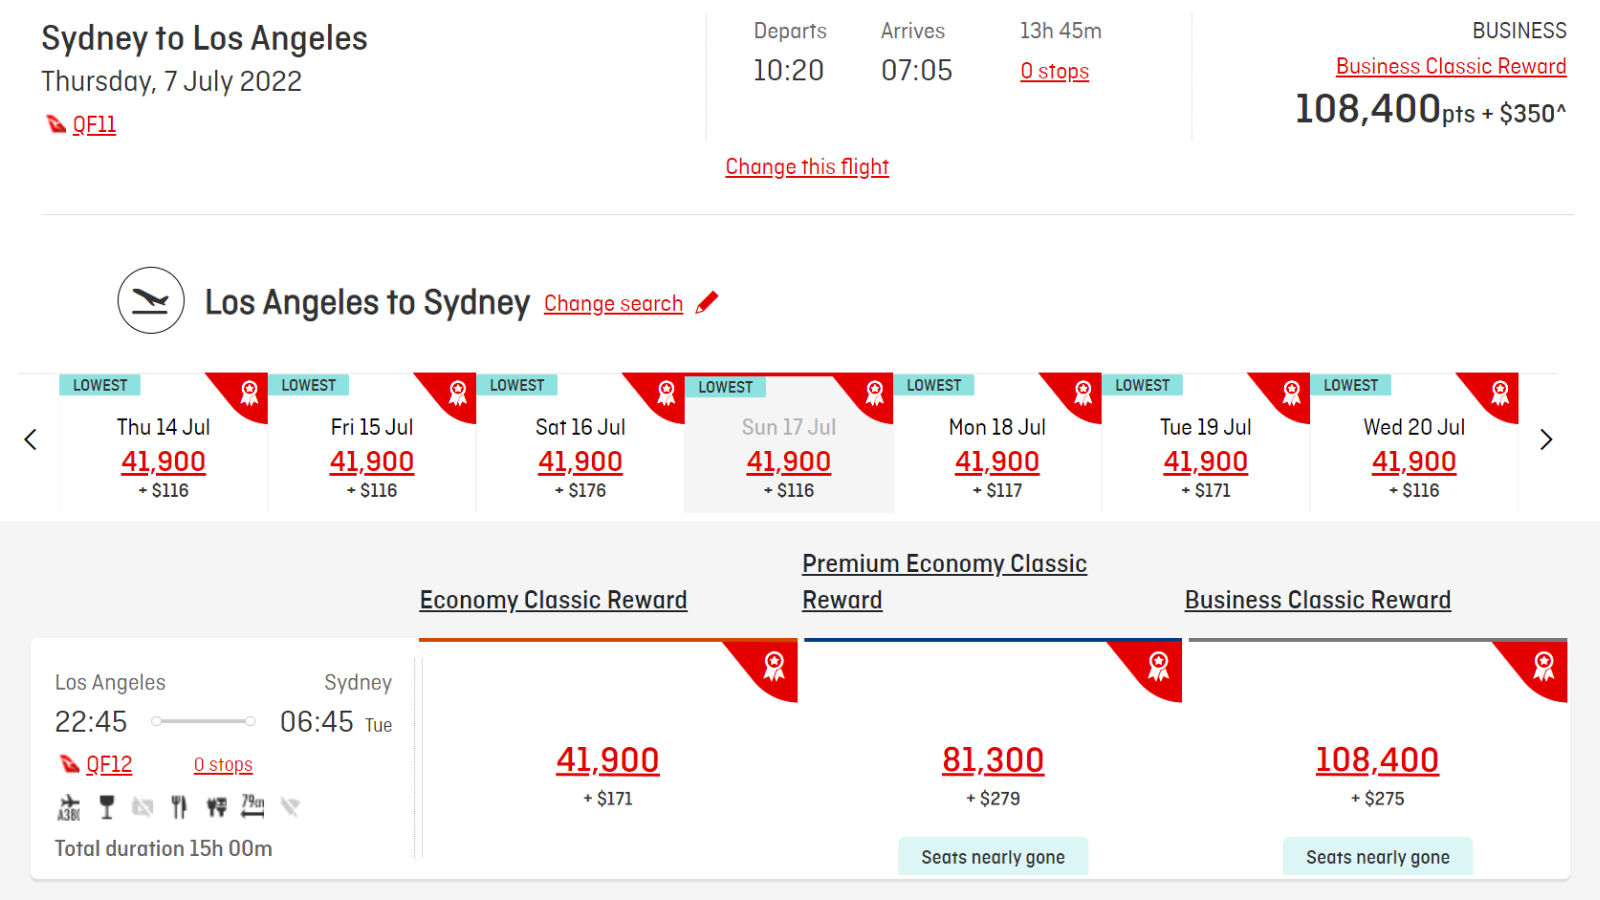 QF12 Melbourne to Los Angeles availability